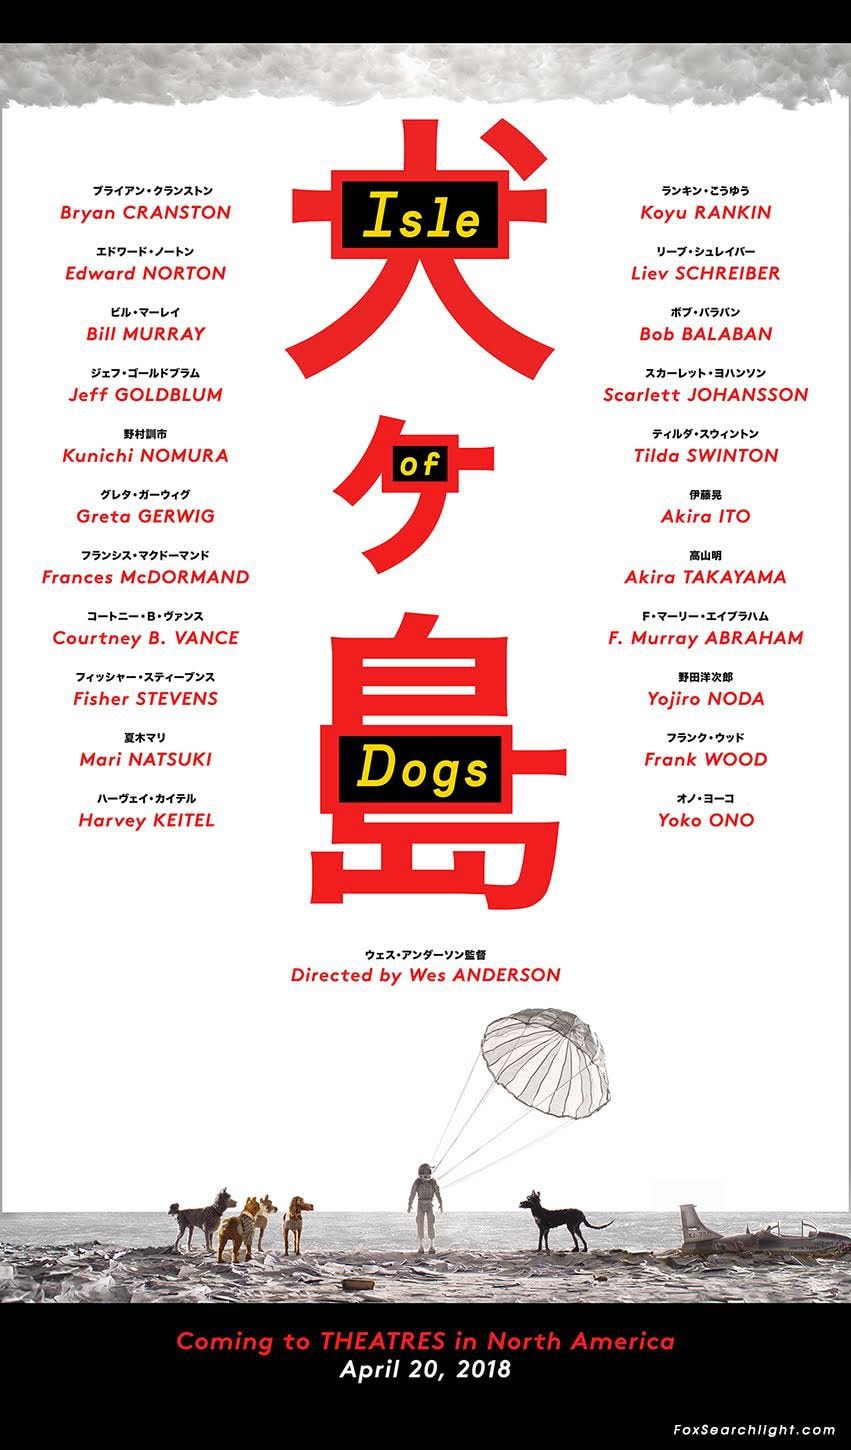 Wes Anderson 動畫新作《Isle of Dogs》海報釋出